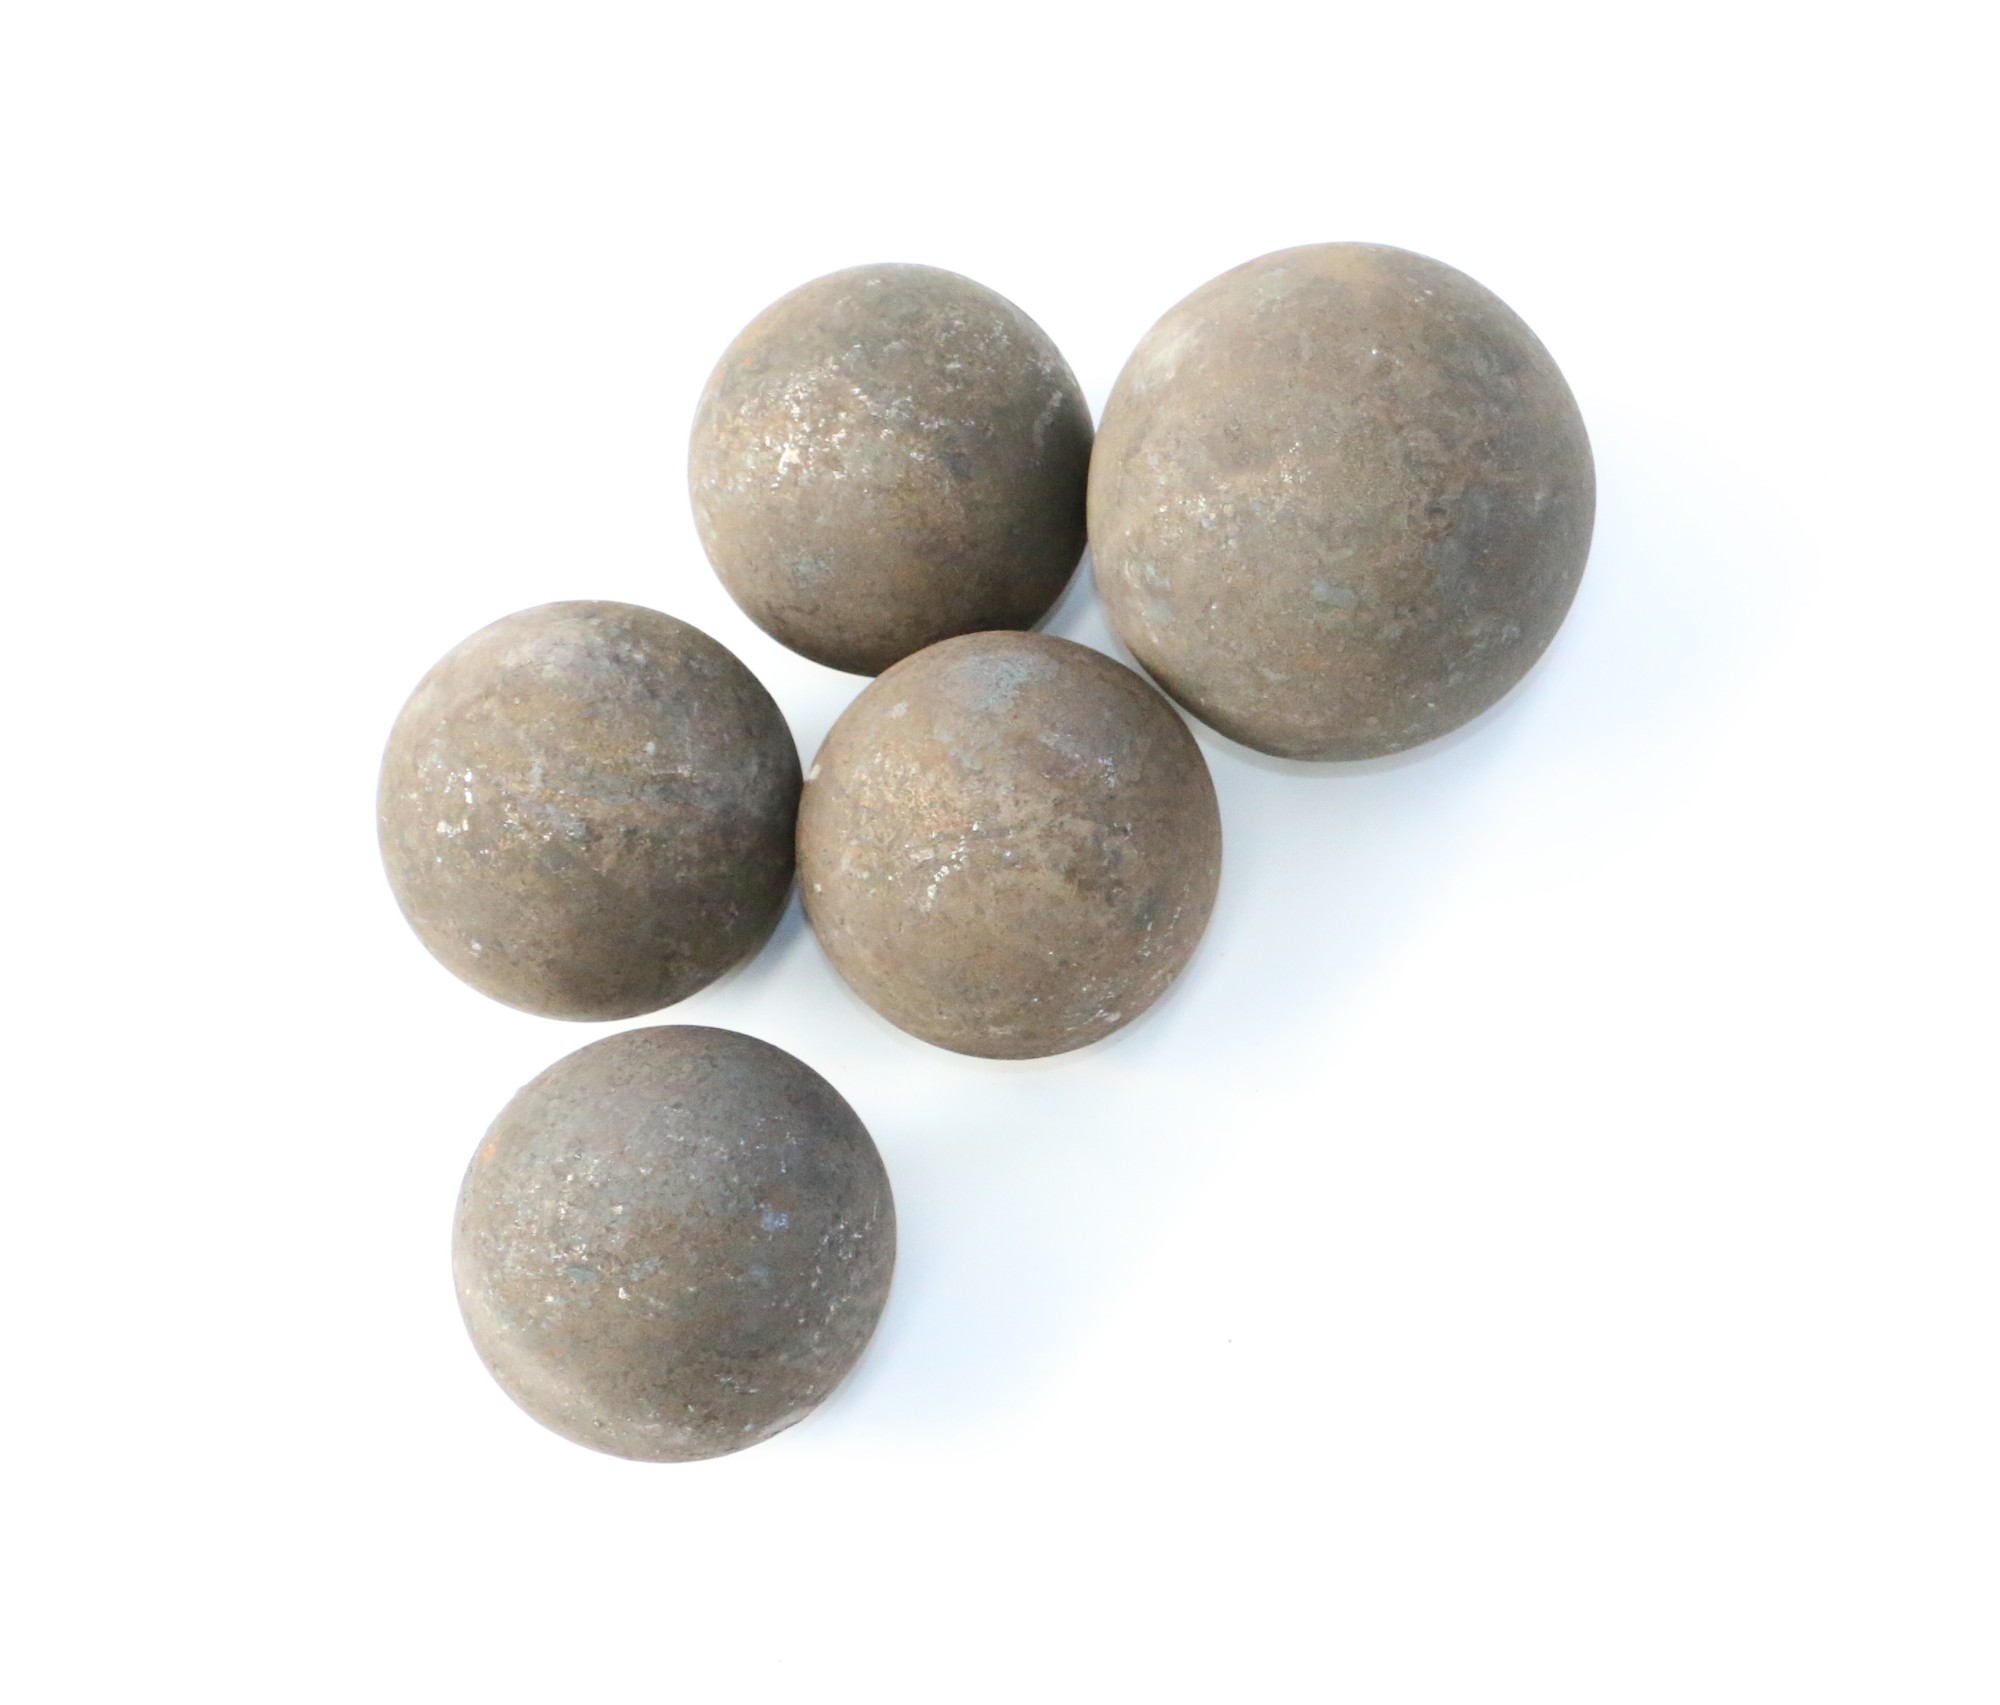 Acheter Forged Balls For Cooper Mining,Forged Balls For Cooper Mining Prix,Forged Balls For Cooper Mining Marques,Forged Balls For Cooper Mining Fabricant,Forged Balls For Cooper Mining Quotes,Forged Balls For Cooper Mining Société,